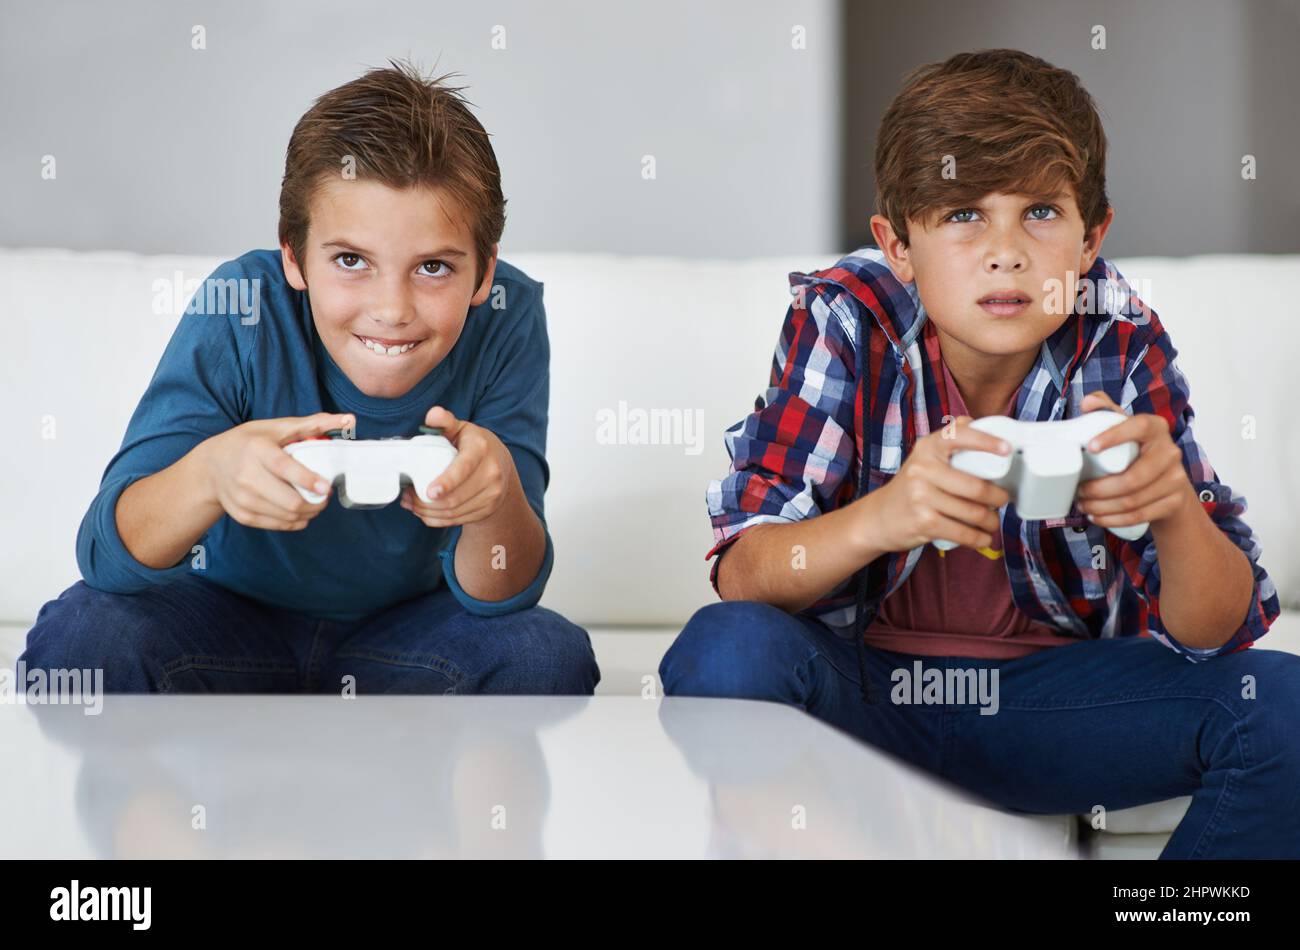 Im gonna beat you. Shot of two young boys concentrating while playing video games. Stock Photo